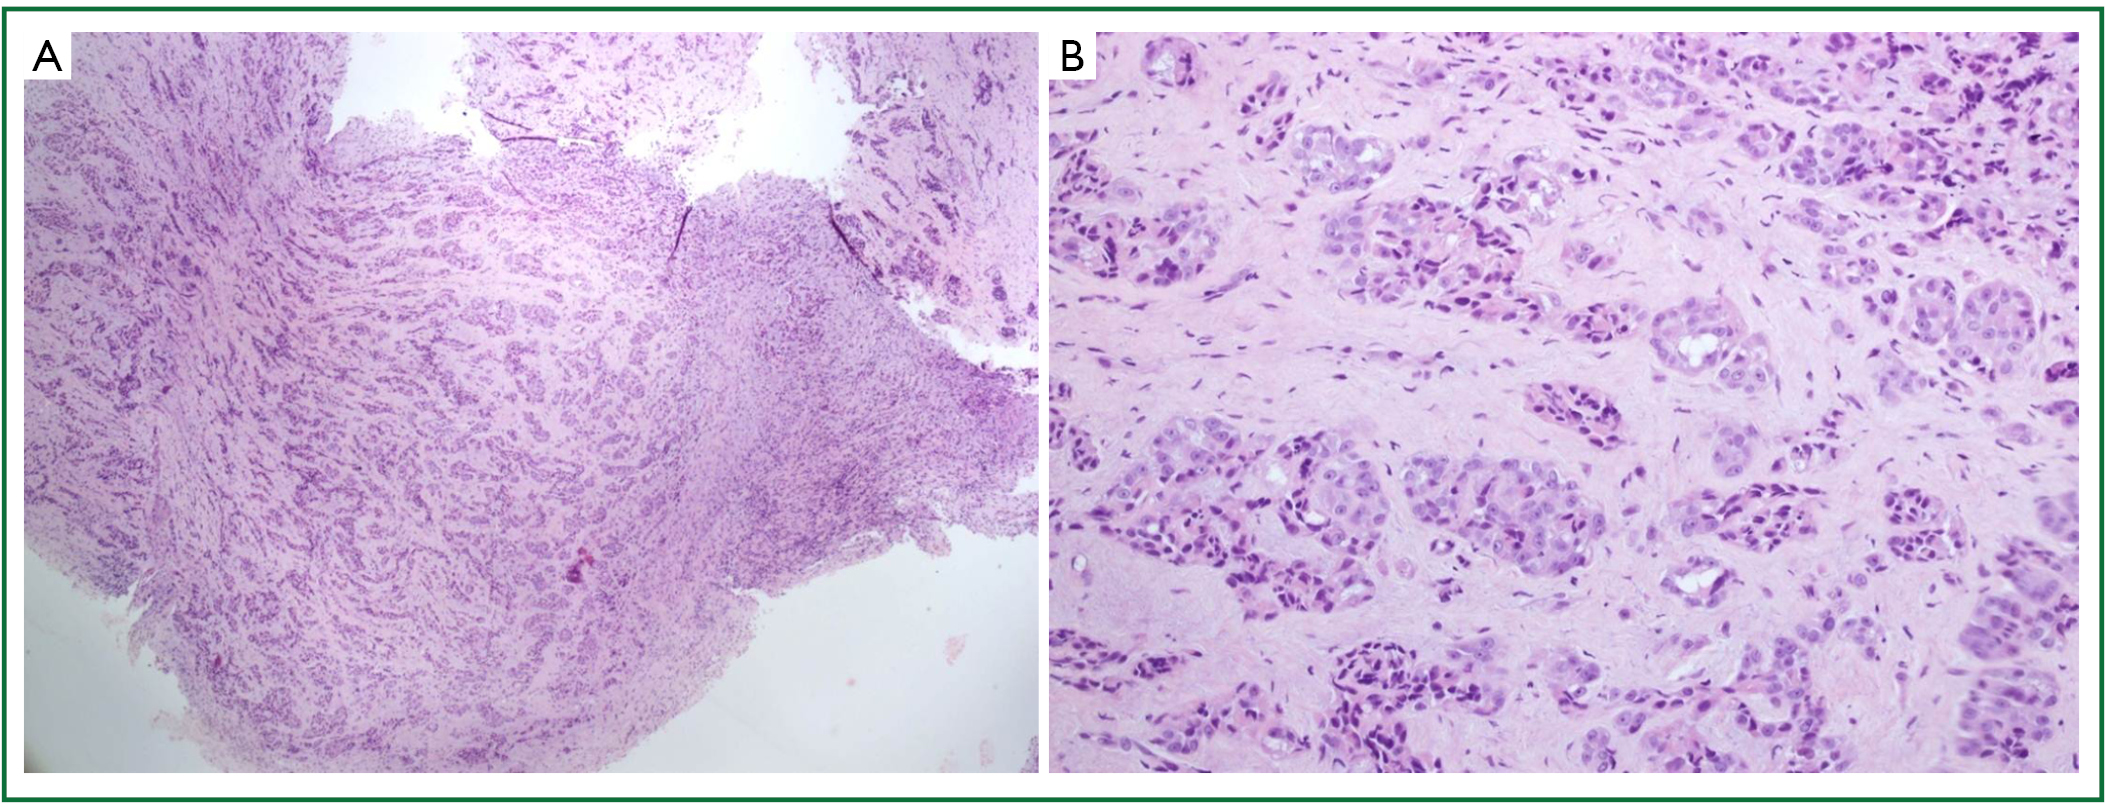 Bone metastases with nerve root compression as a late complication in
patient with epithelial